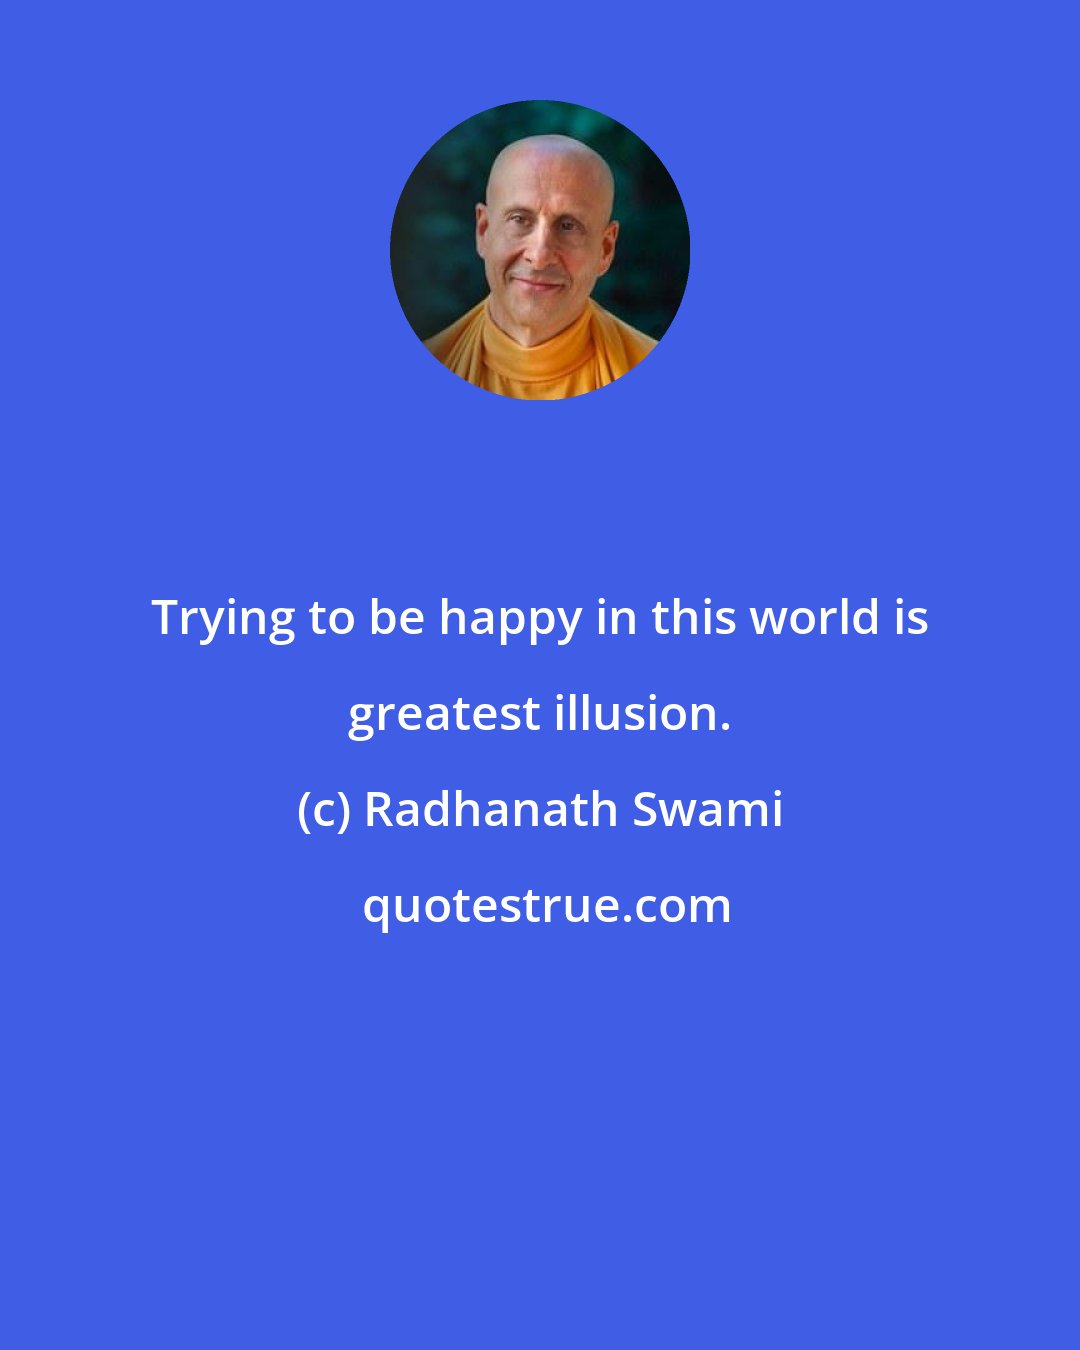 Radhanath Swami: Trying to be happy in this world is greatest illusion.